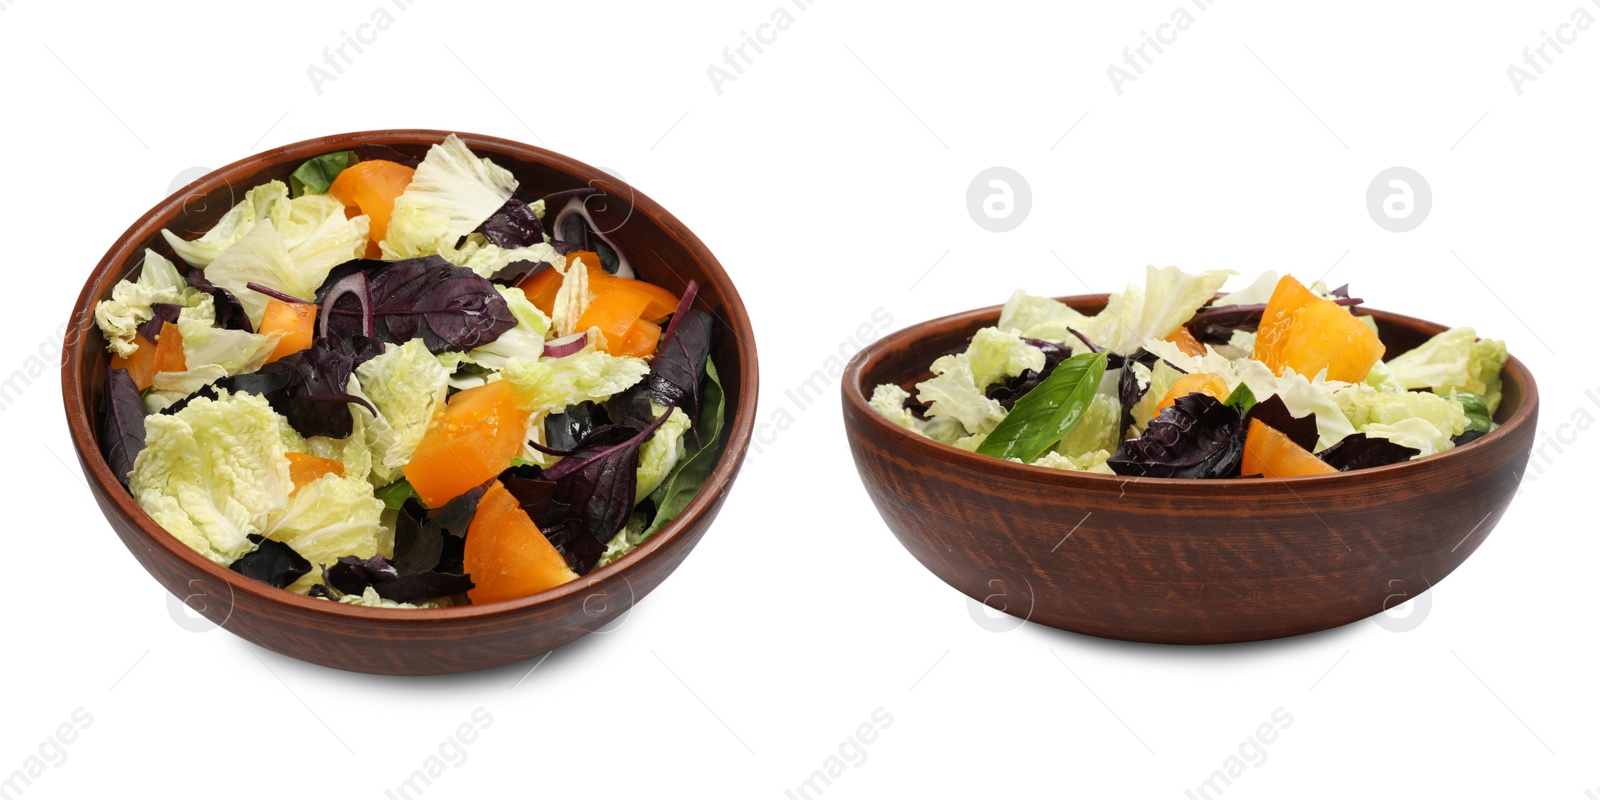 Image of Bowls of delicious salad with Chinese cabbage, tomato and basil on white background